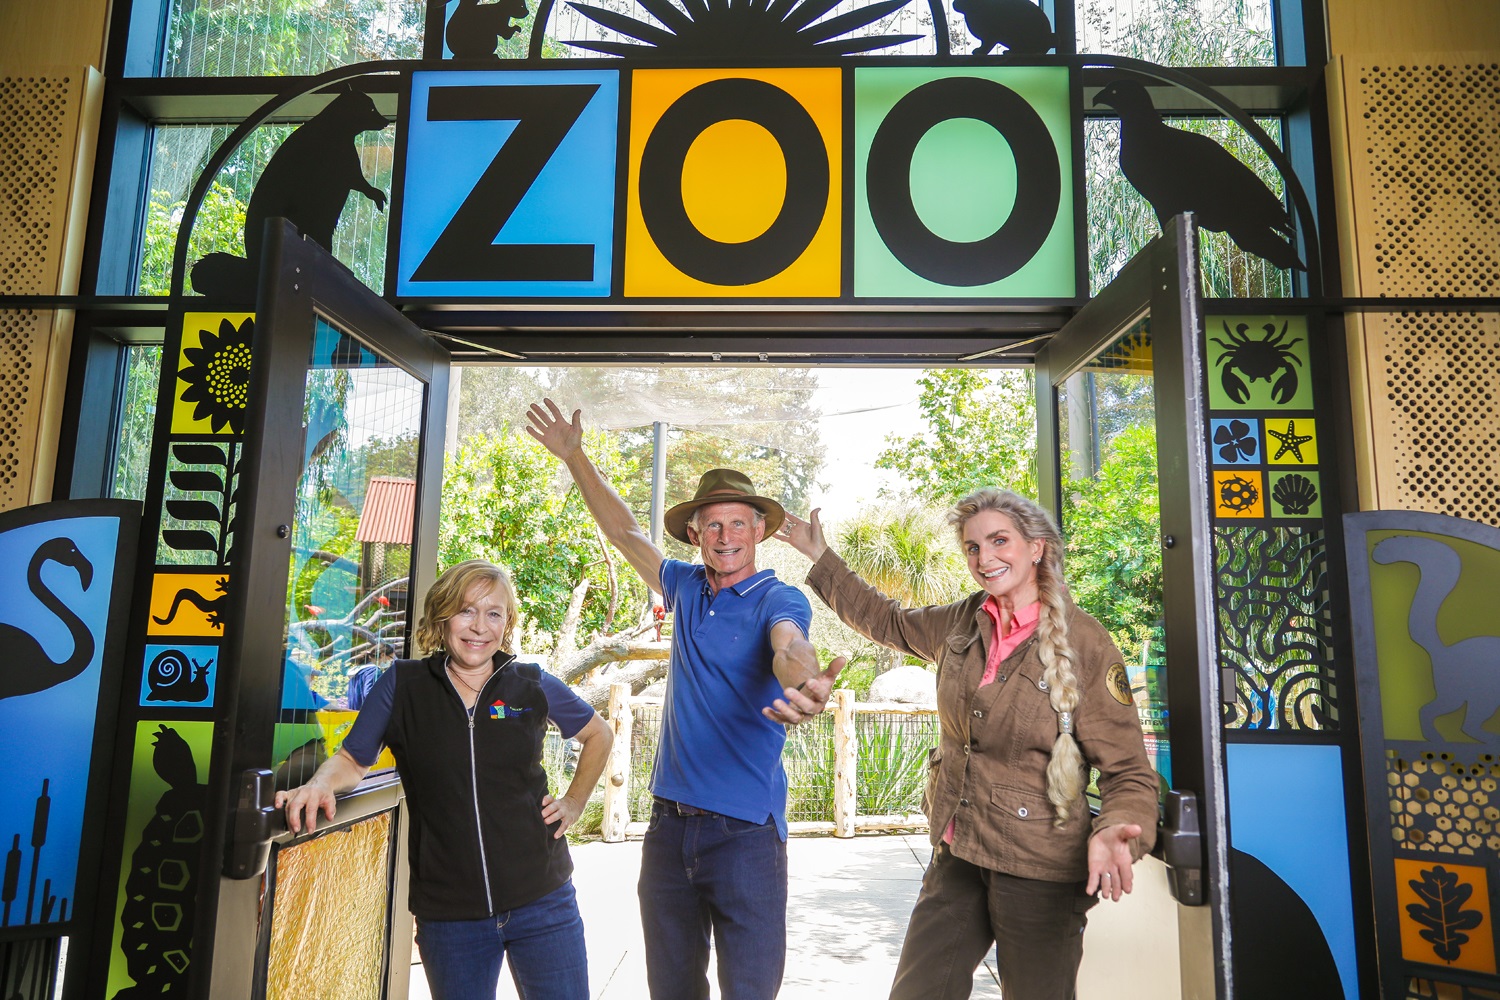 Alex, John, and Lee stand in front of the doors to the zoo, holding them open in a welcoming gesture.